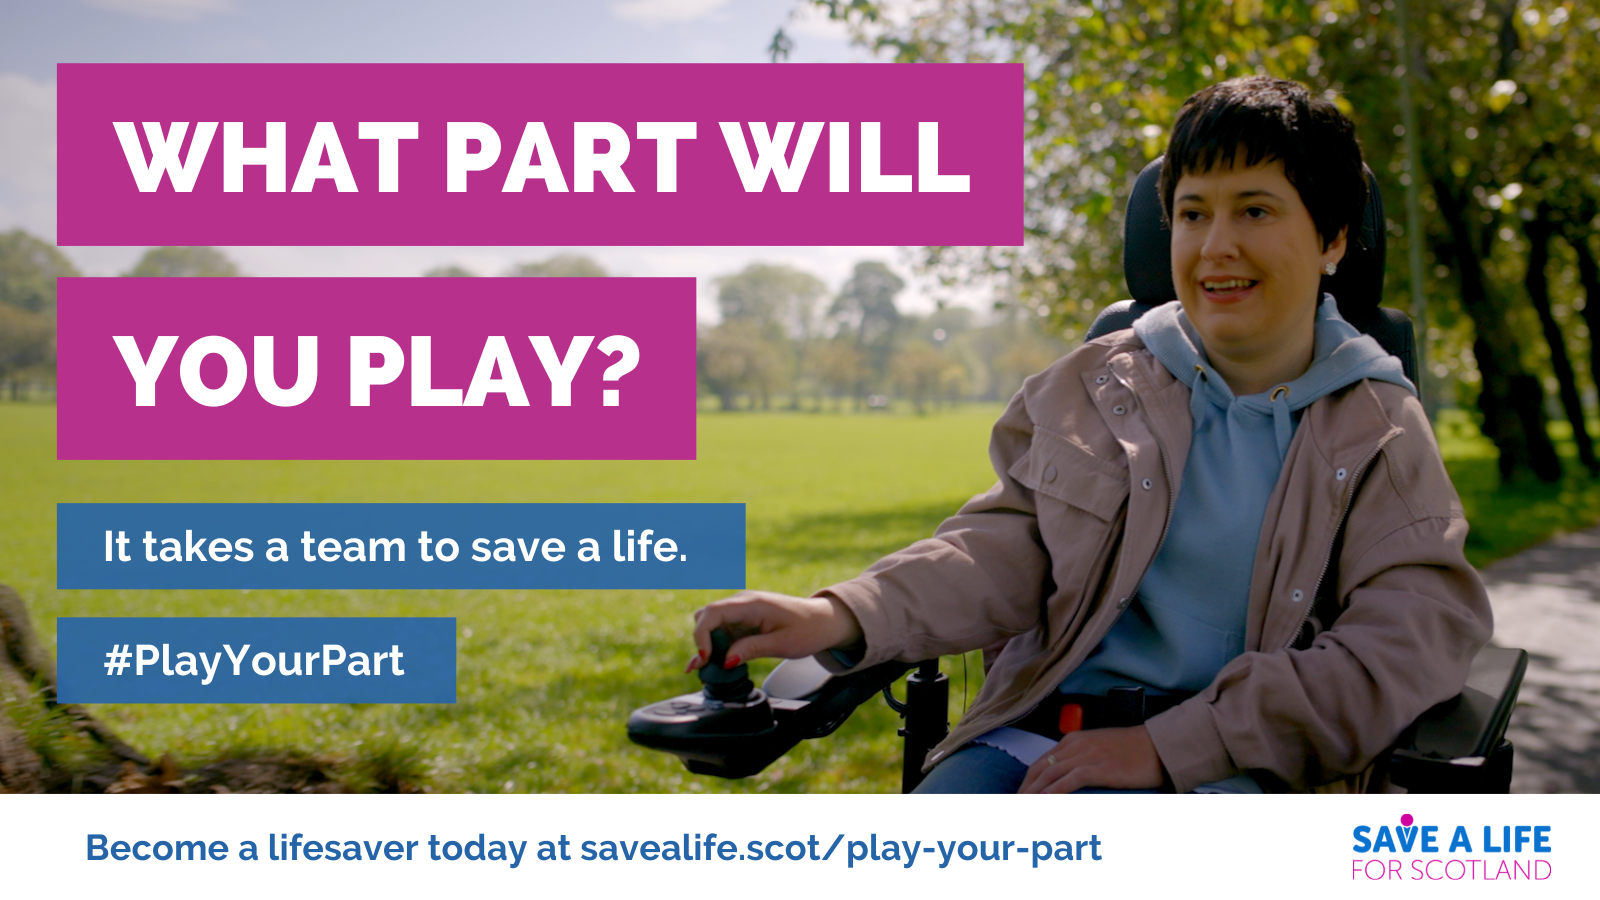 Image of a woman in a wheelchair with green space or public park in the background. Heading text: What part will you play? Other text: It takes a team to save a life. Hashtag PlayYourPart. Become a lifesaver today at savealife.scot/play-your-part. Save a Life for Scotland logo.